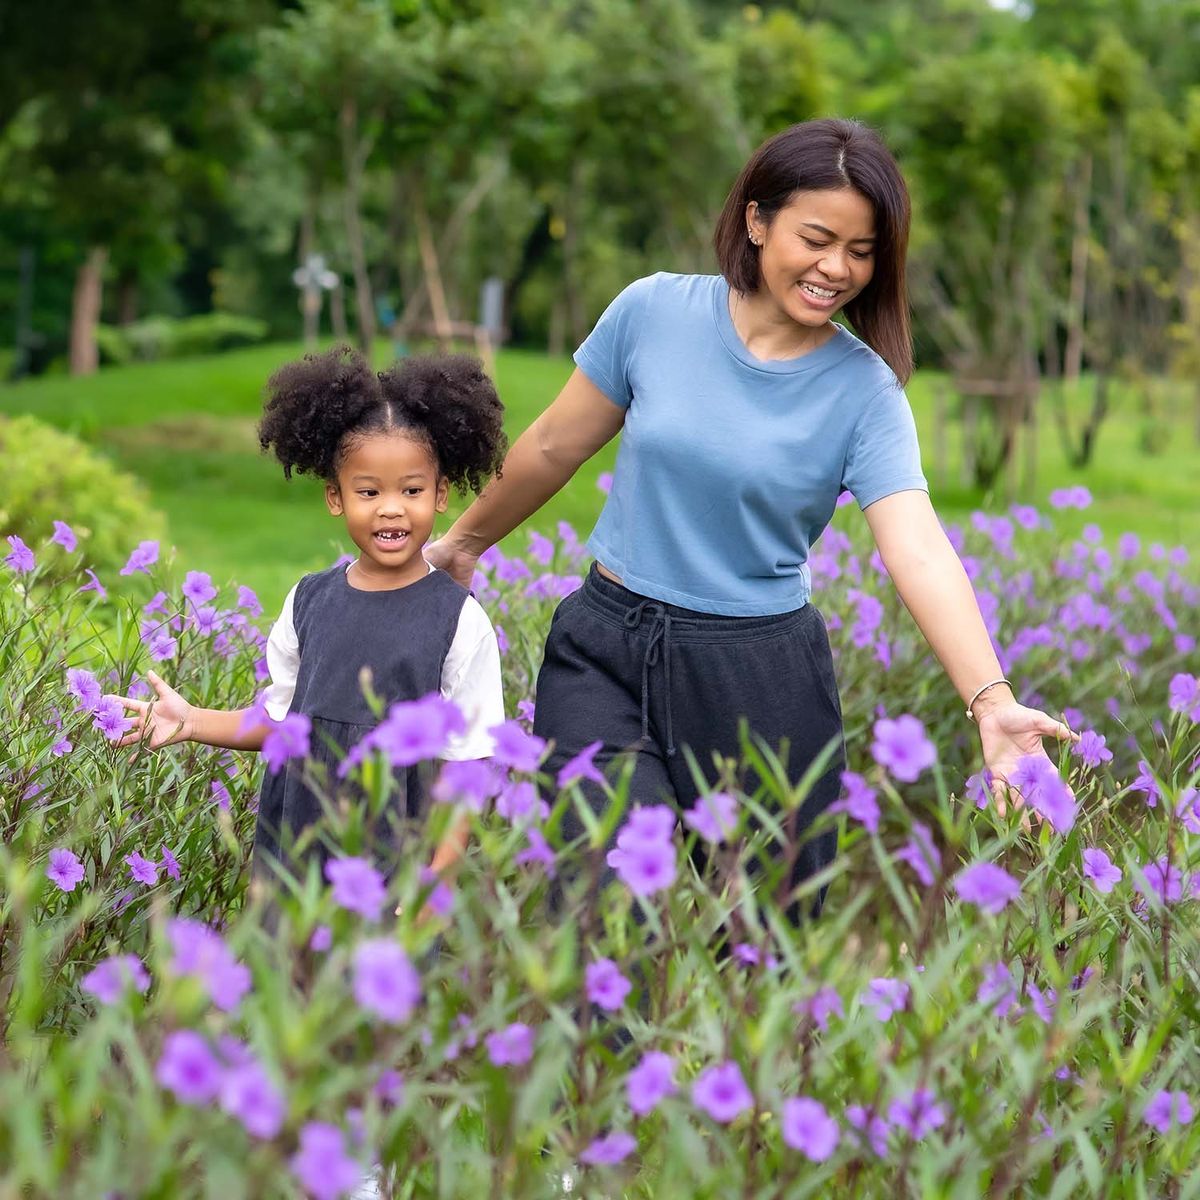 A woman and a child outdoors around flowers